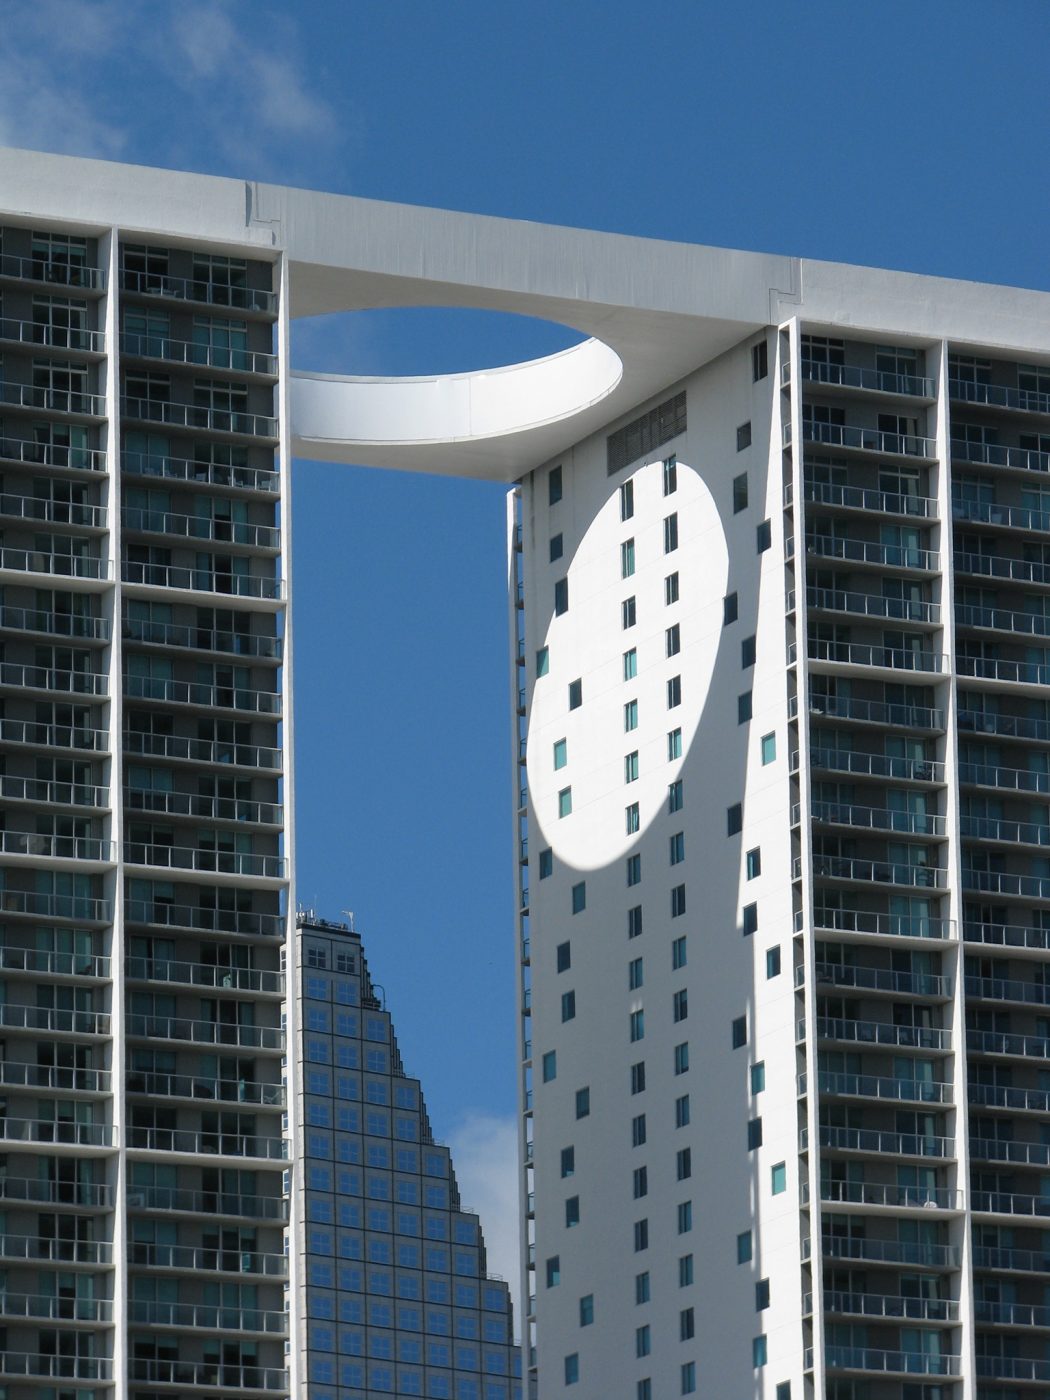 3-500 Brickell in Miami by Arquitectonica